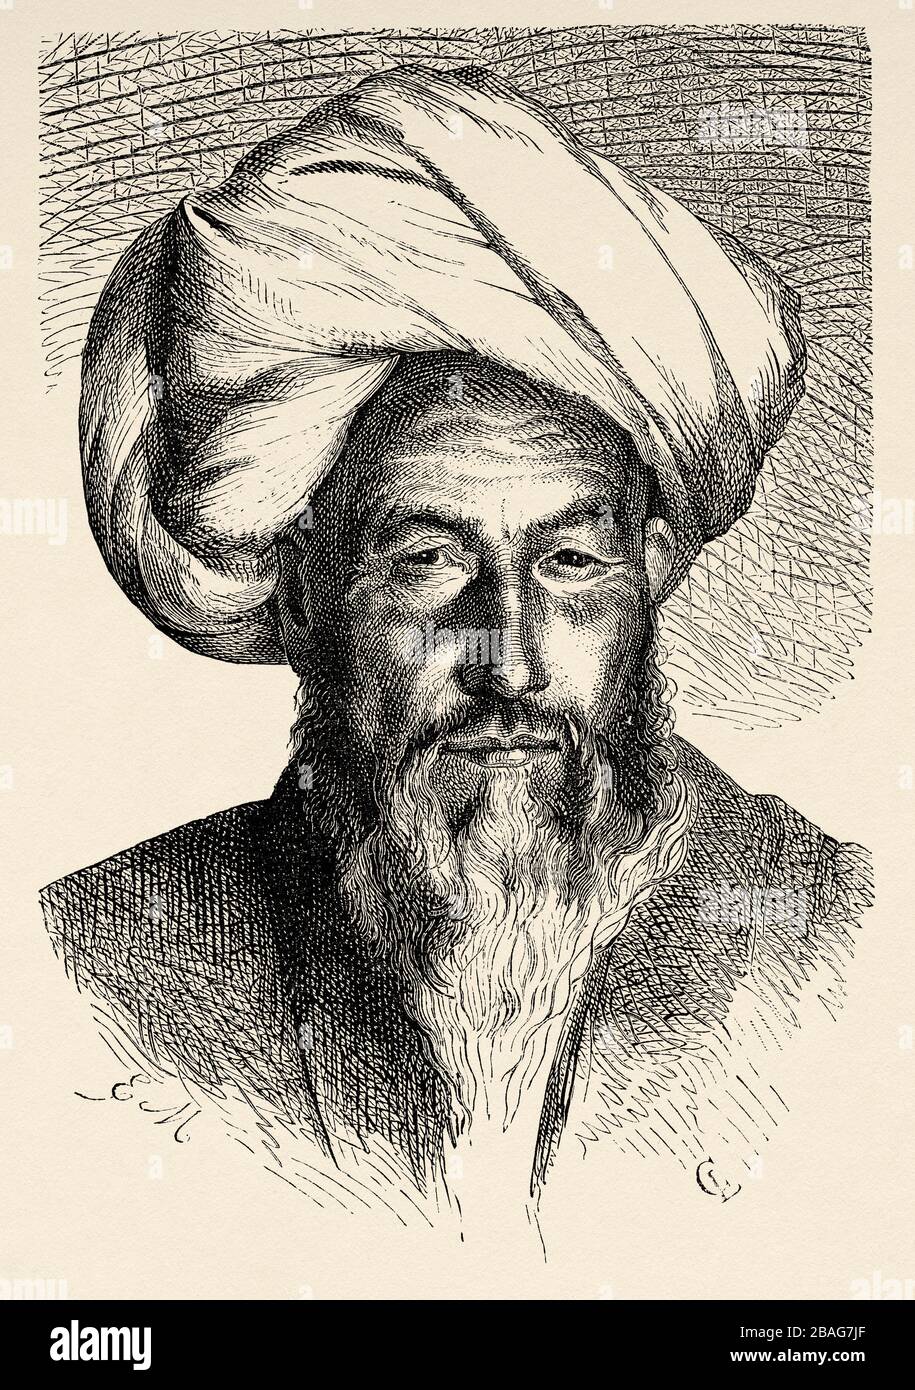 Portrait of Sart man, mayor of Hodgiaghend, from Travels in central Asia 1863 by Armin Vambery. Old engraving El Mundo en la Mano 1878 Stock Photo